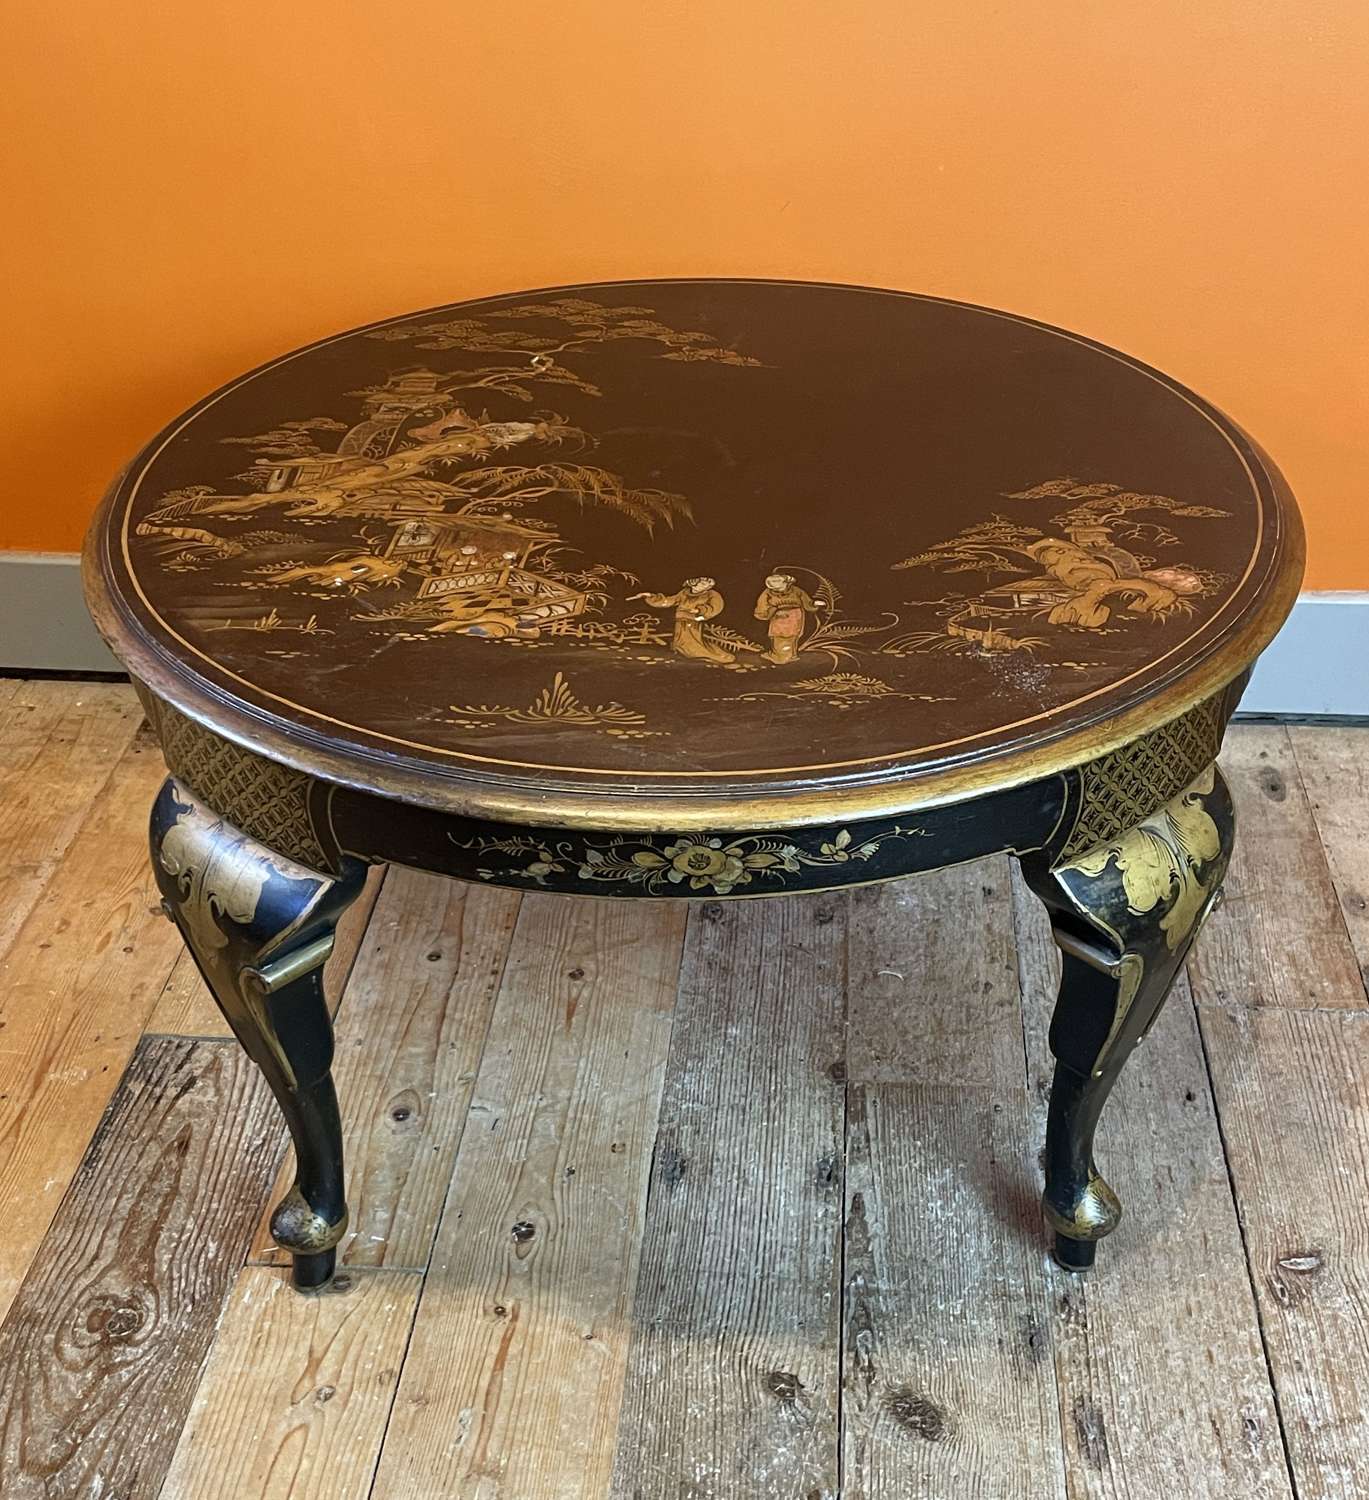 Chinoiserie Decorated Black Lacquer Circular Low Table